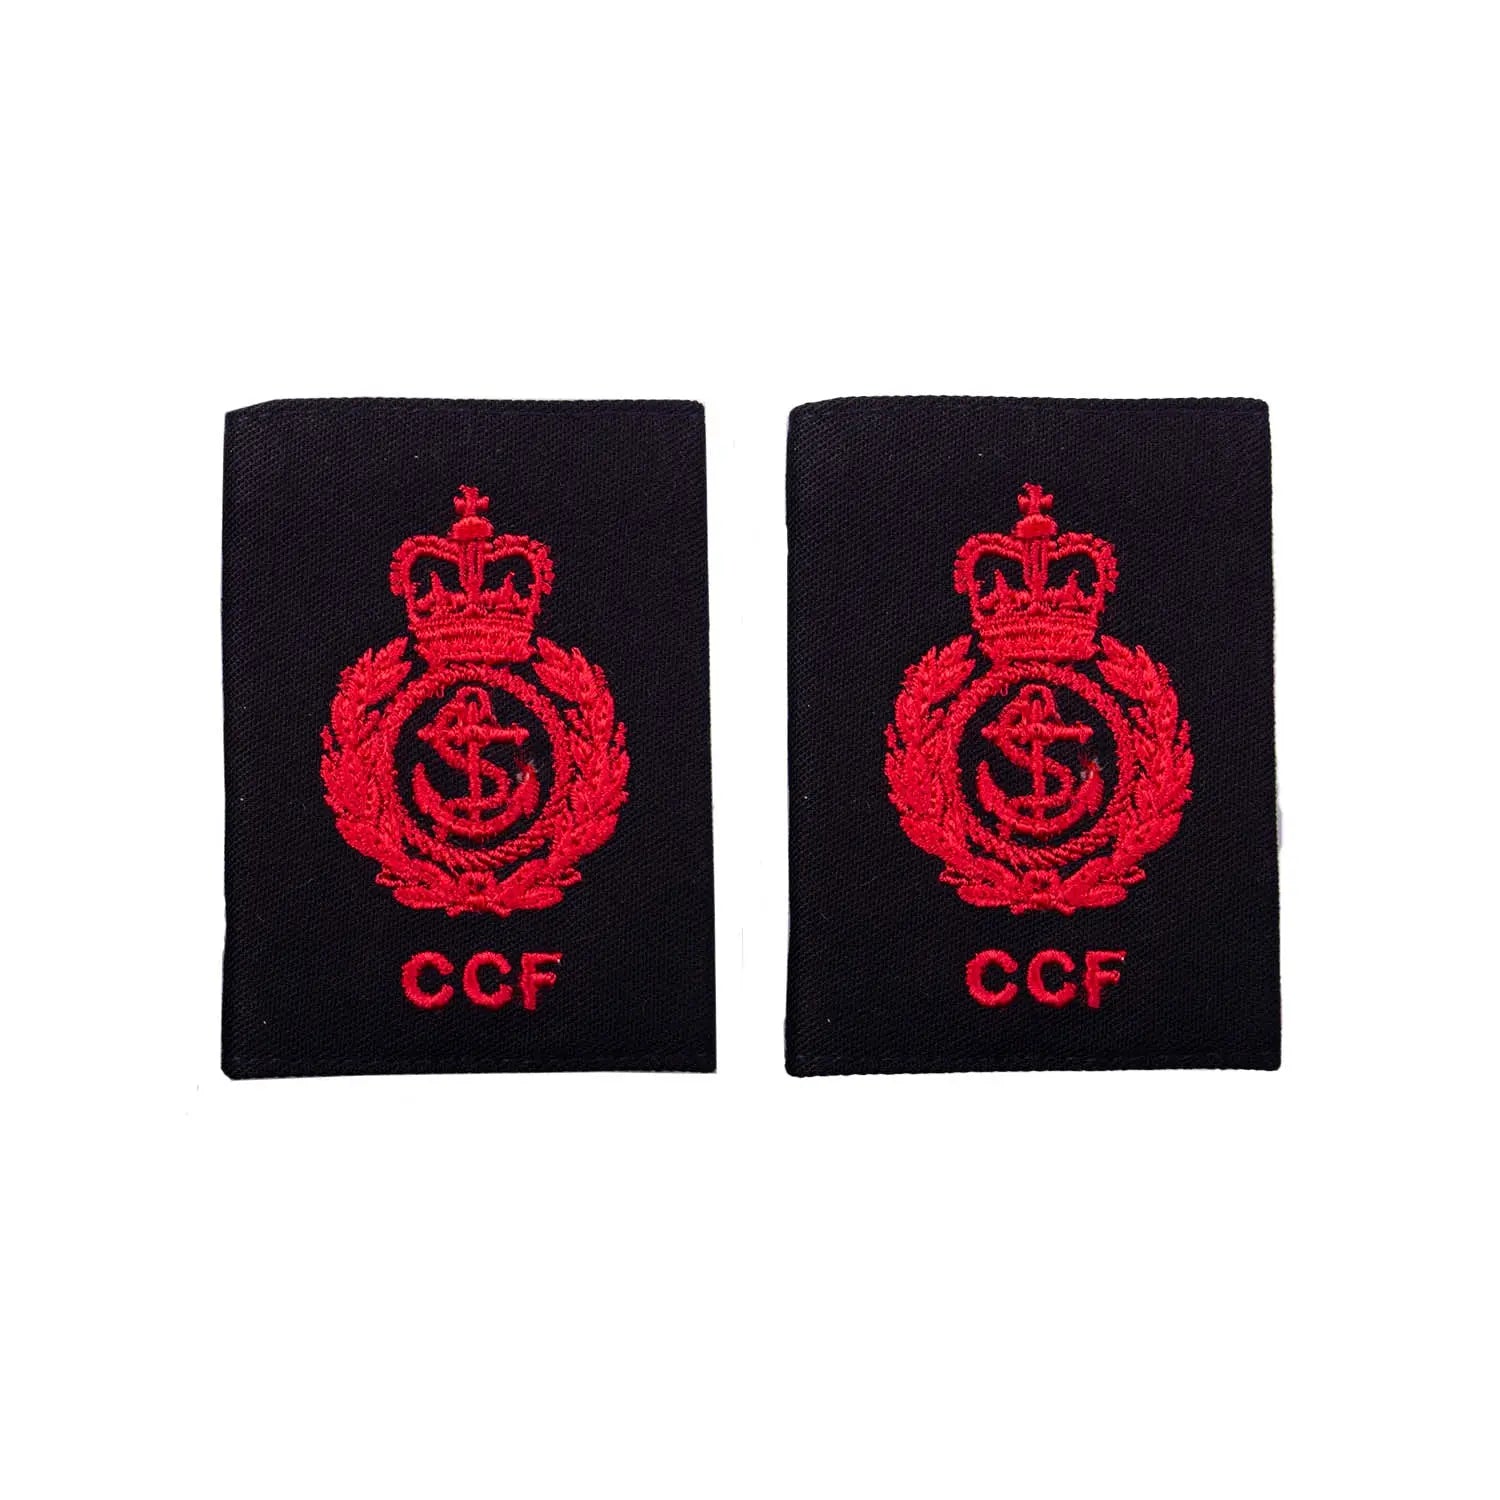 Petty Officer Combined Cadet Force Slider Epaulette (CCF) wyedean